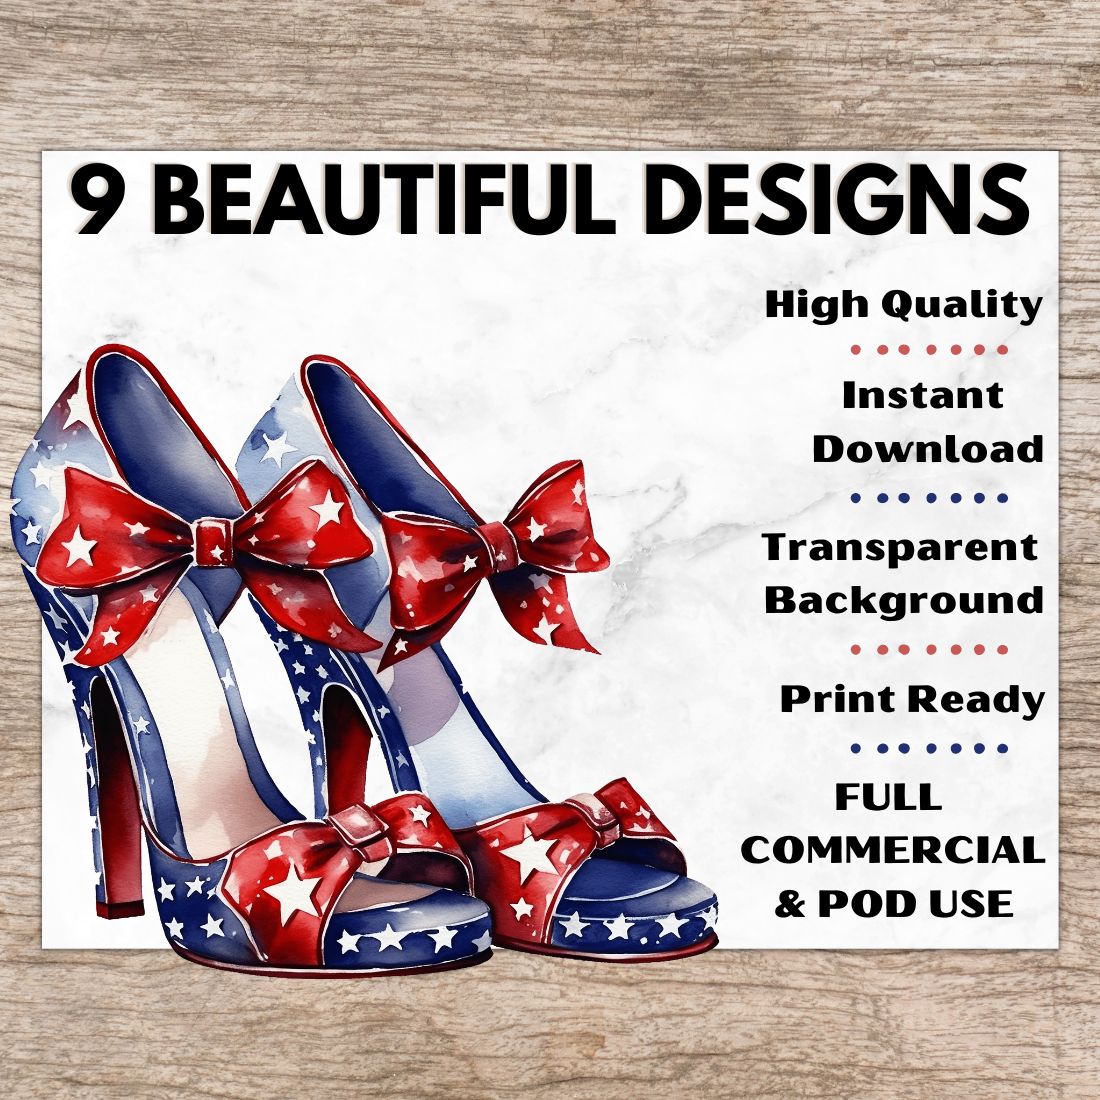 Blue & Red Sequin Sparkling Heels Pointed Toe American Flag Pumps